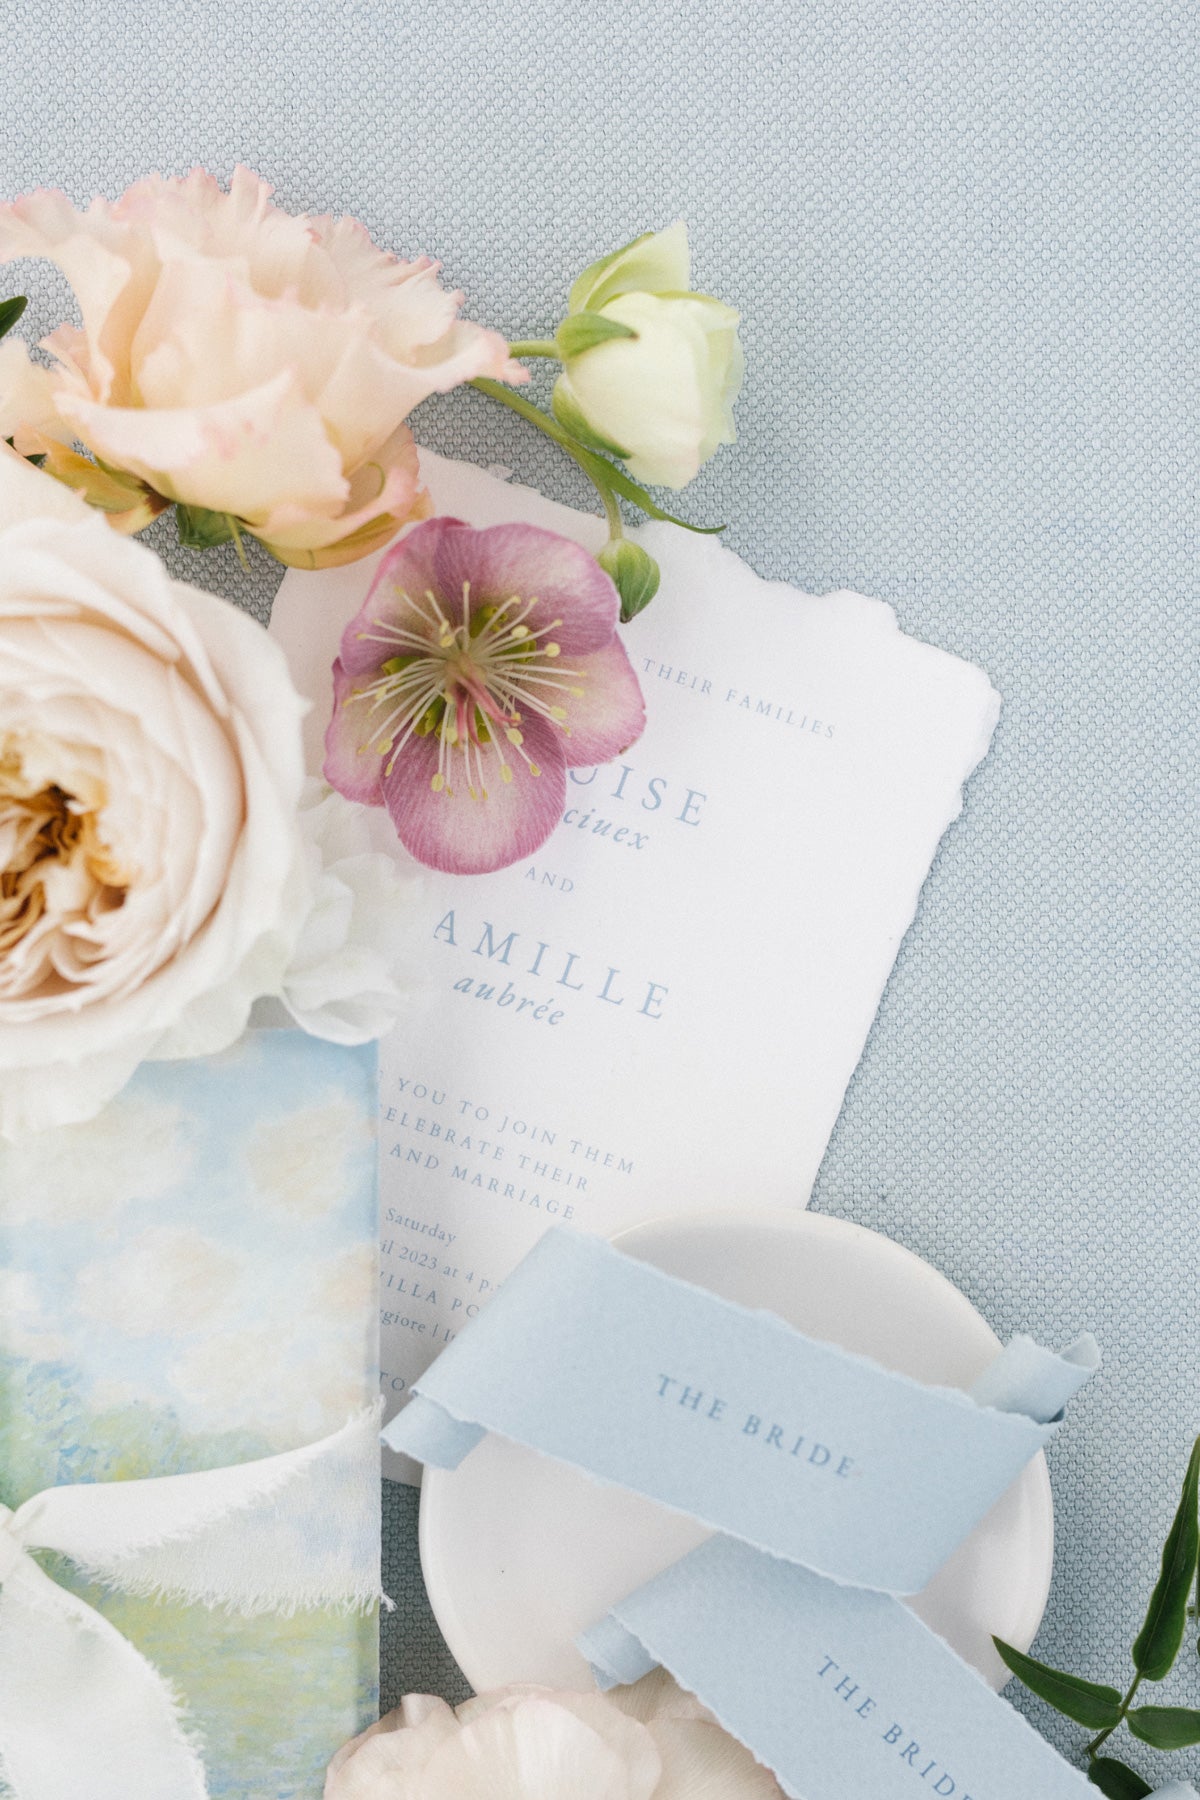 A stunning wedding invitation design featuring intricate details on handmade paper